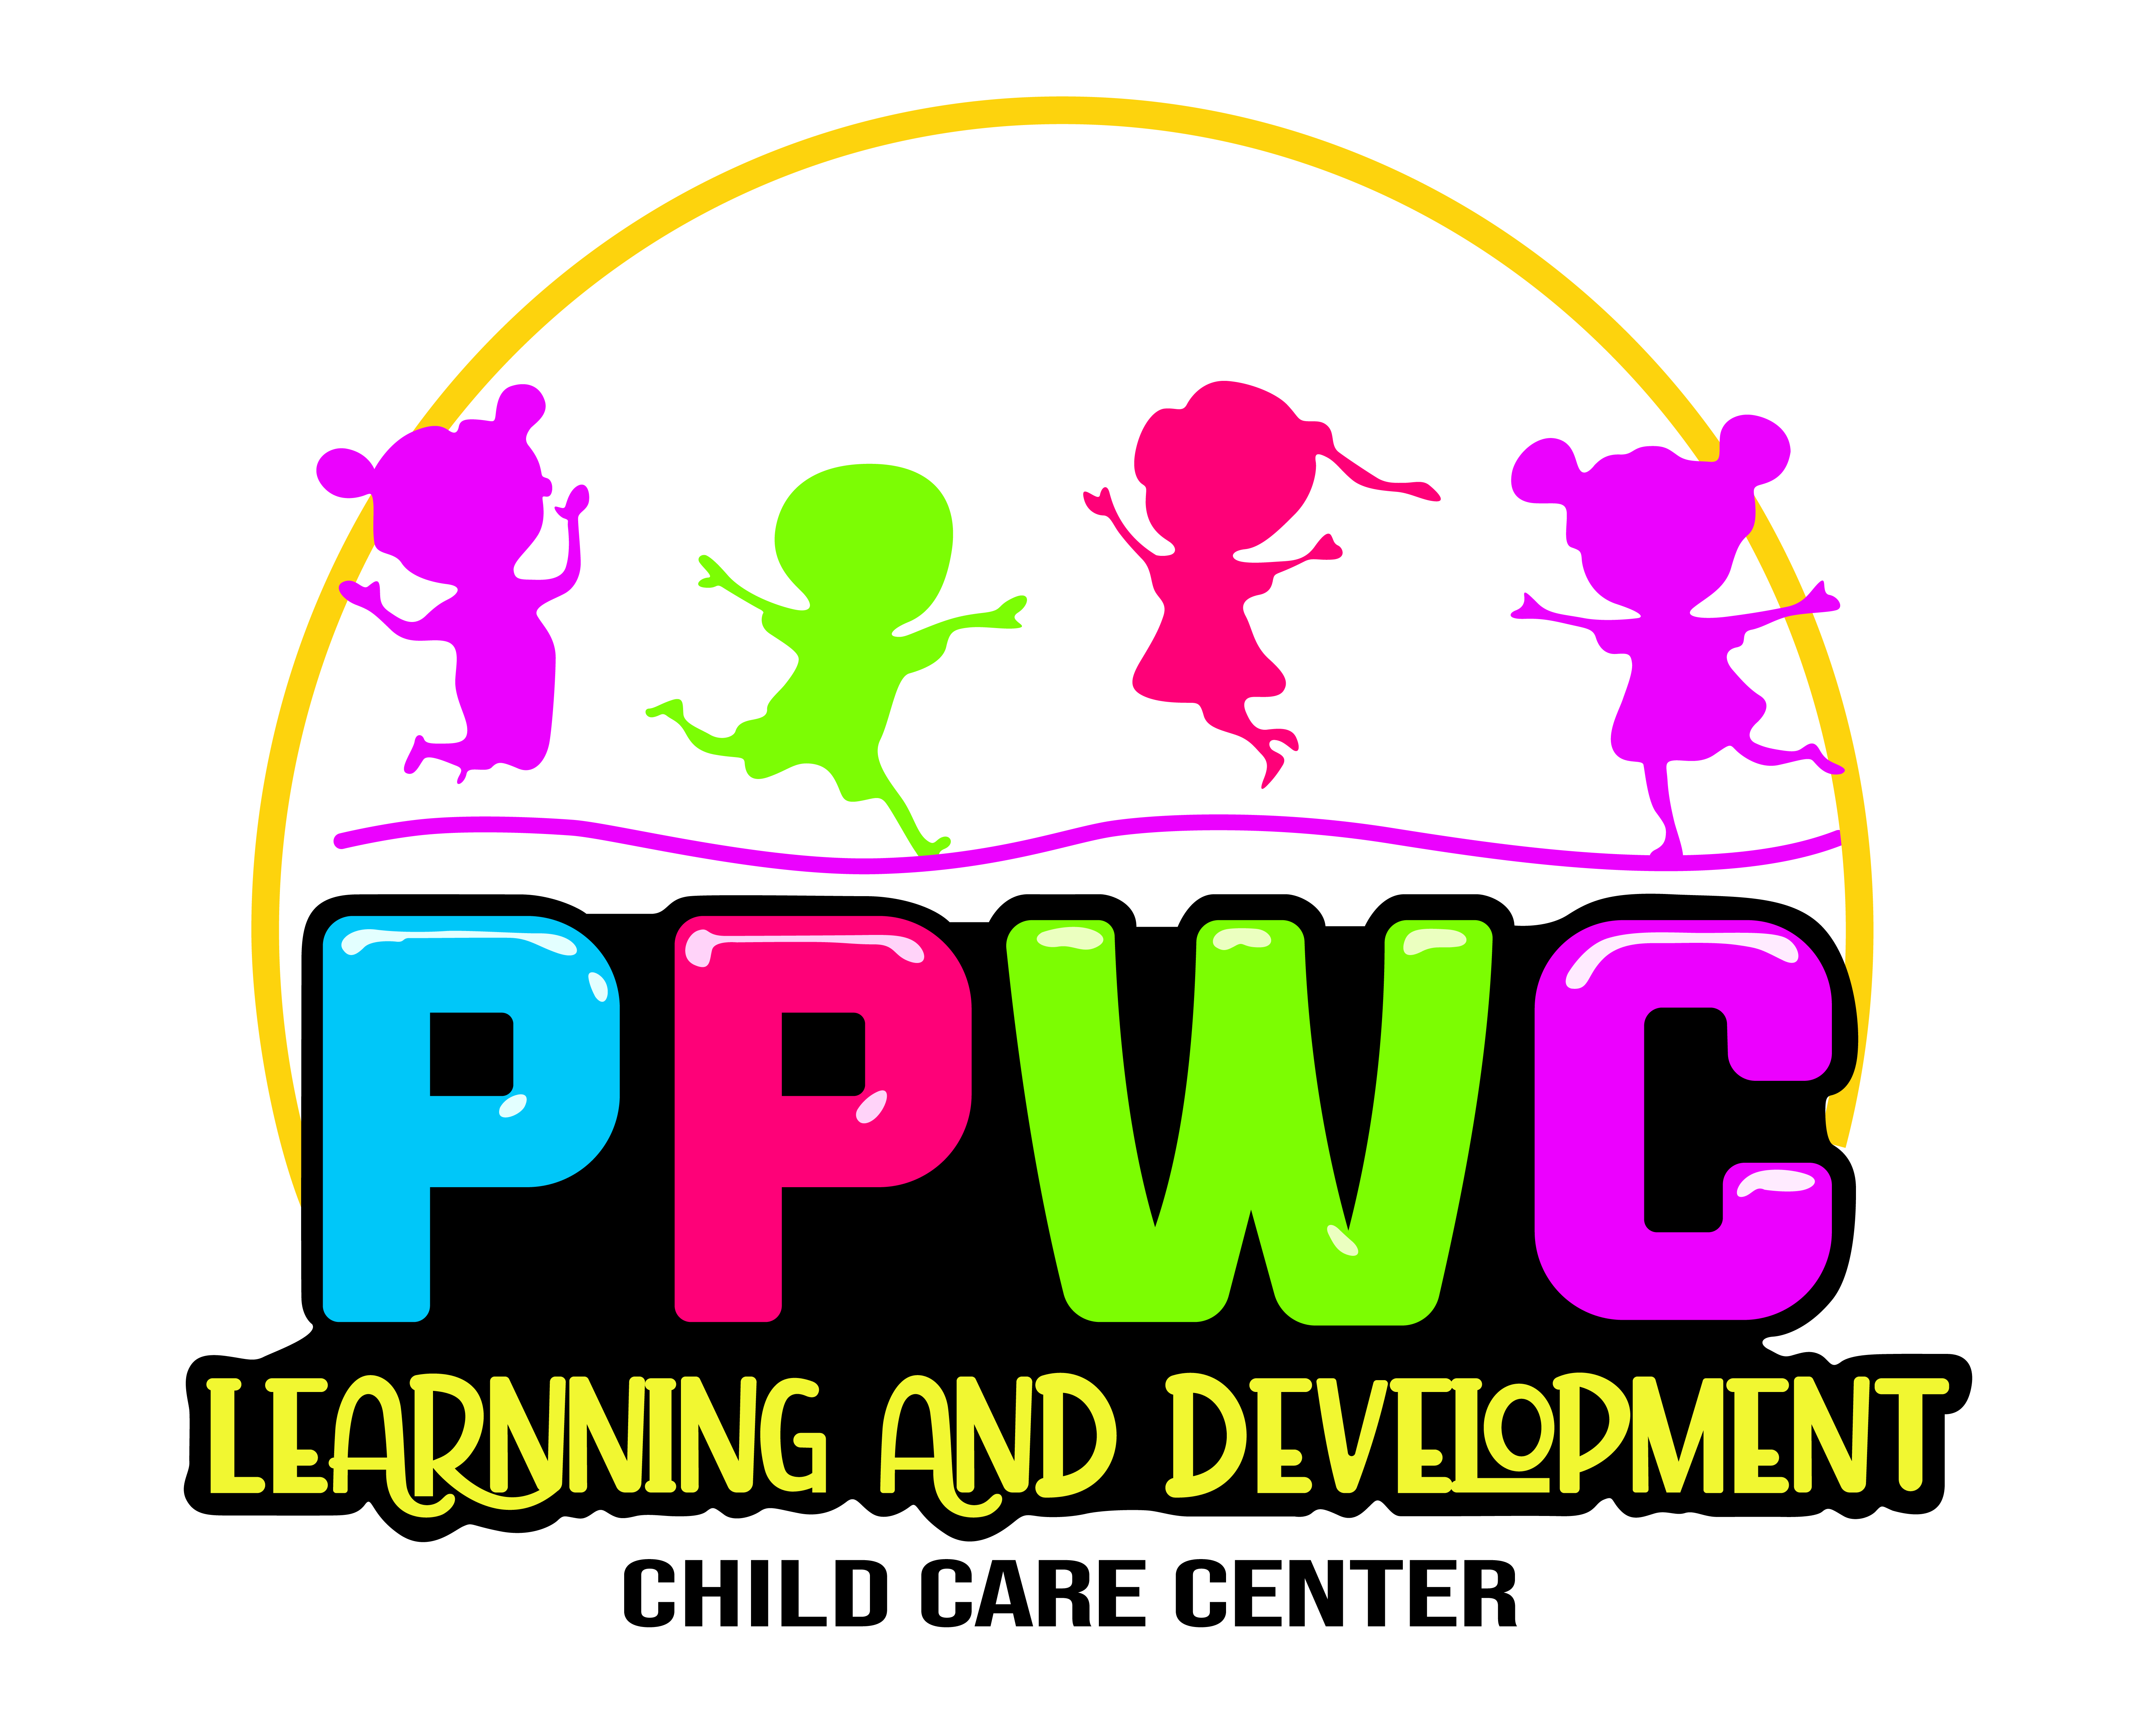 PPWC Learning and Development Childcare Center logo